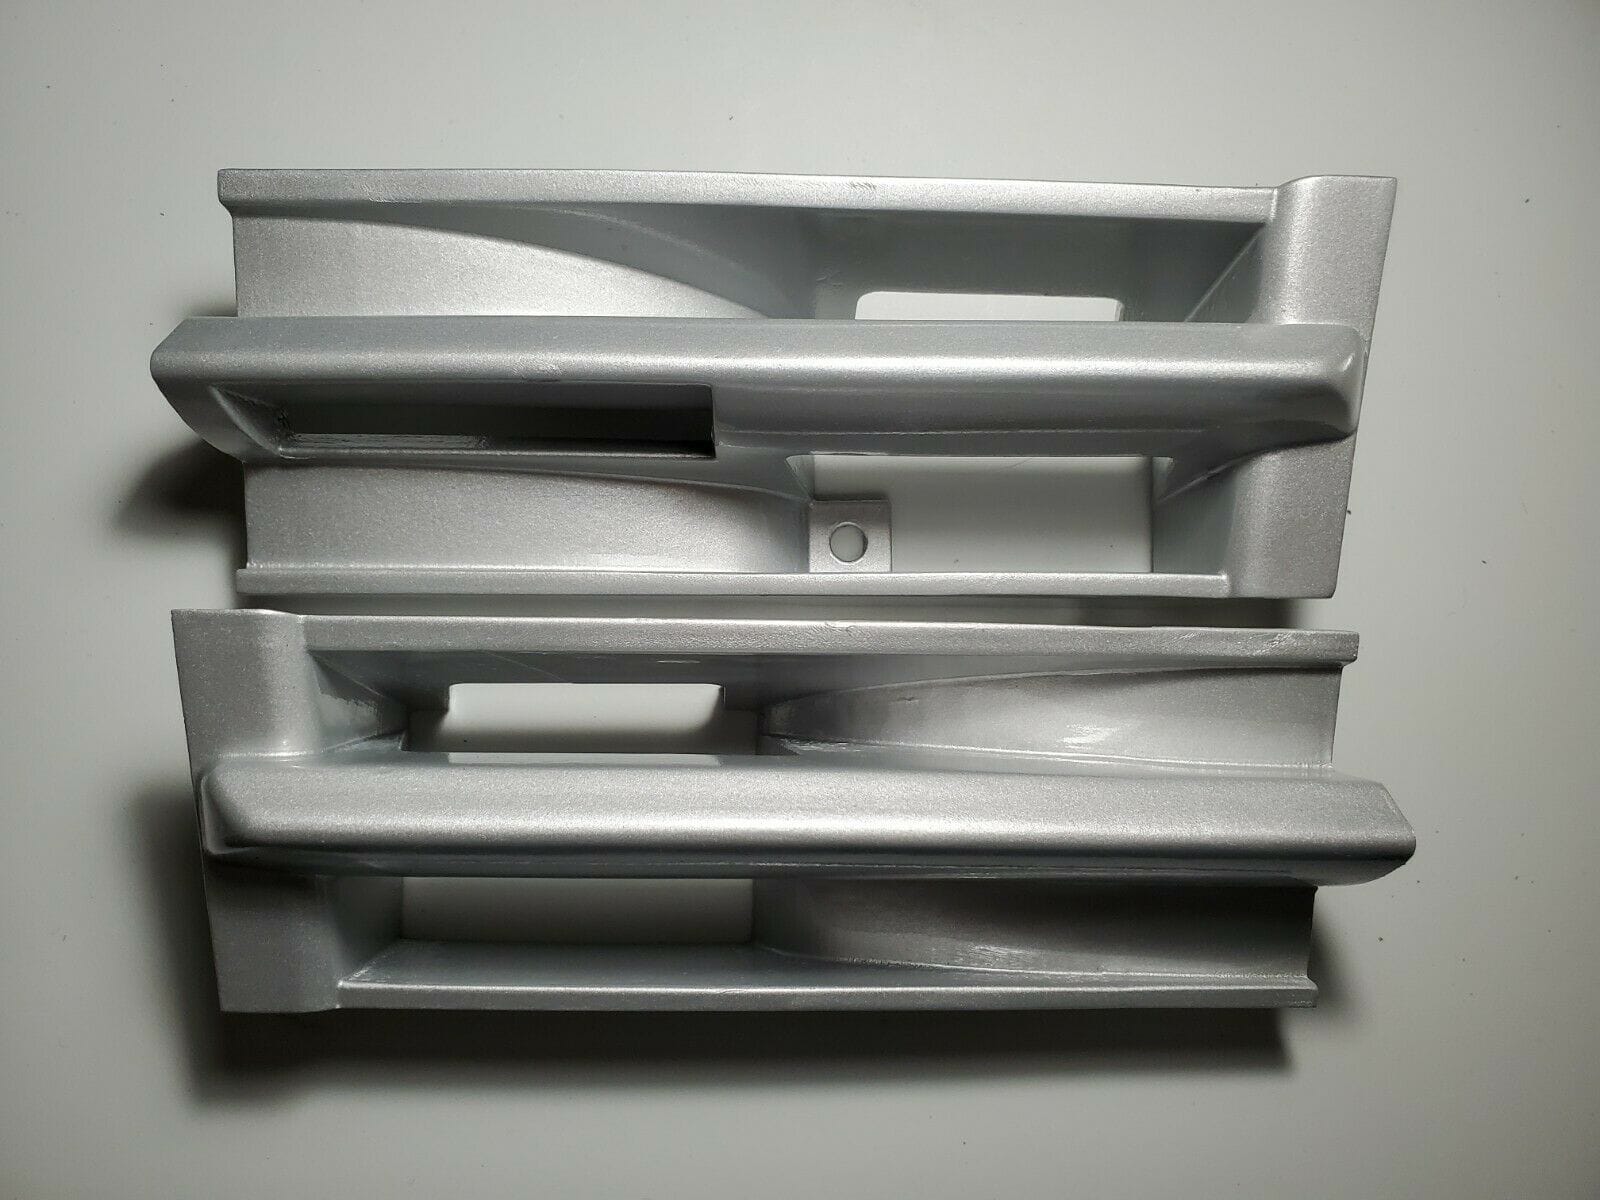 Exterior Body Parts - Mercedes-Benz C36 AMG (W202) 1993-1997 - FRONT BUMPER TOW COVERS (PAIR) - New - 1994 to 1997 Mercedes-Benz C36 AMG - Longueuil, QC J4M, Canada